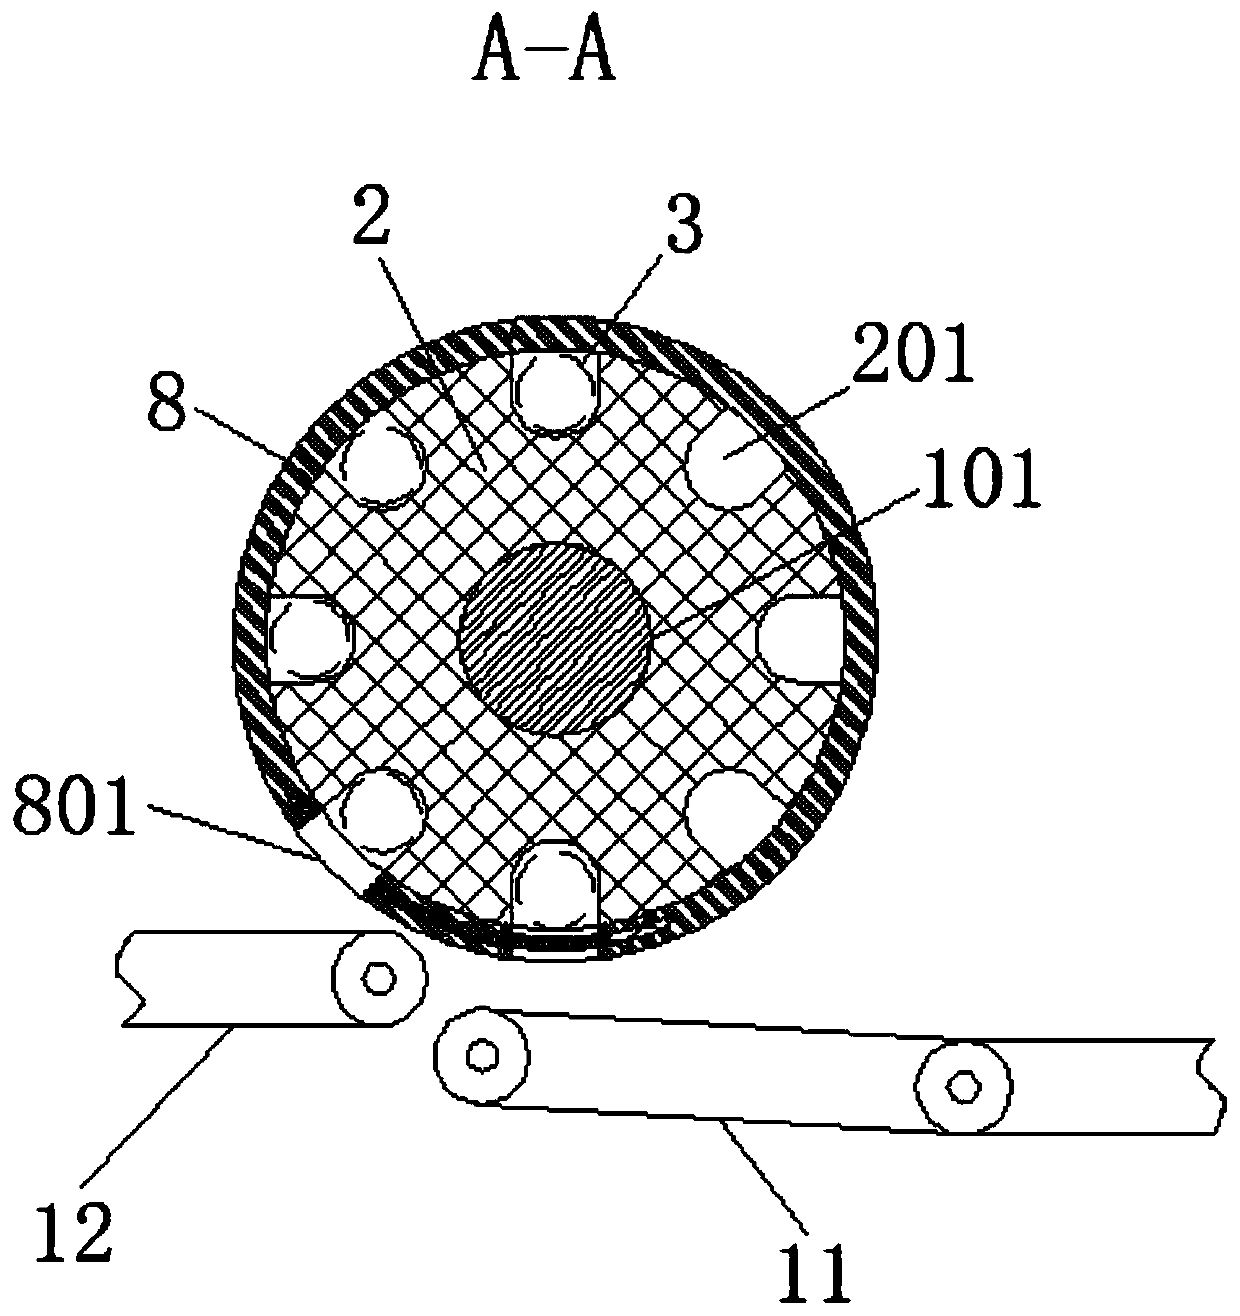 Flow production detection device capable of rapidly screening LED lamps